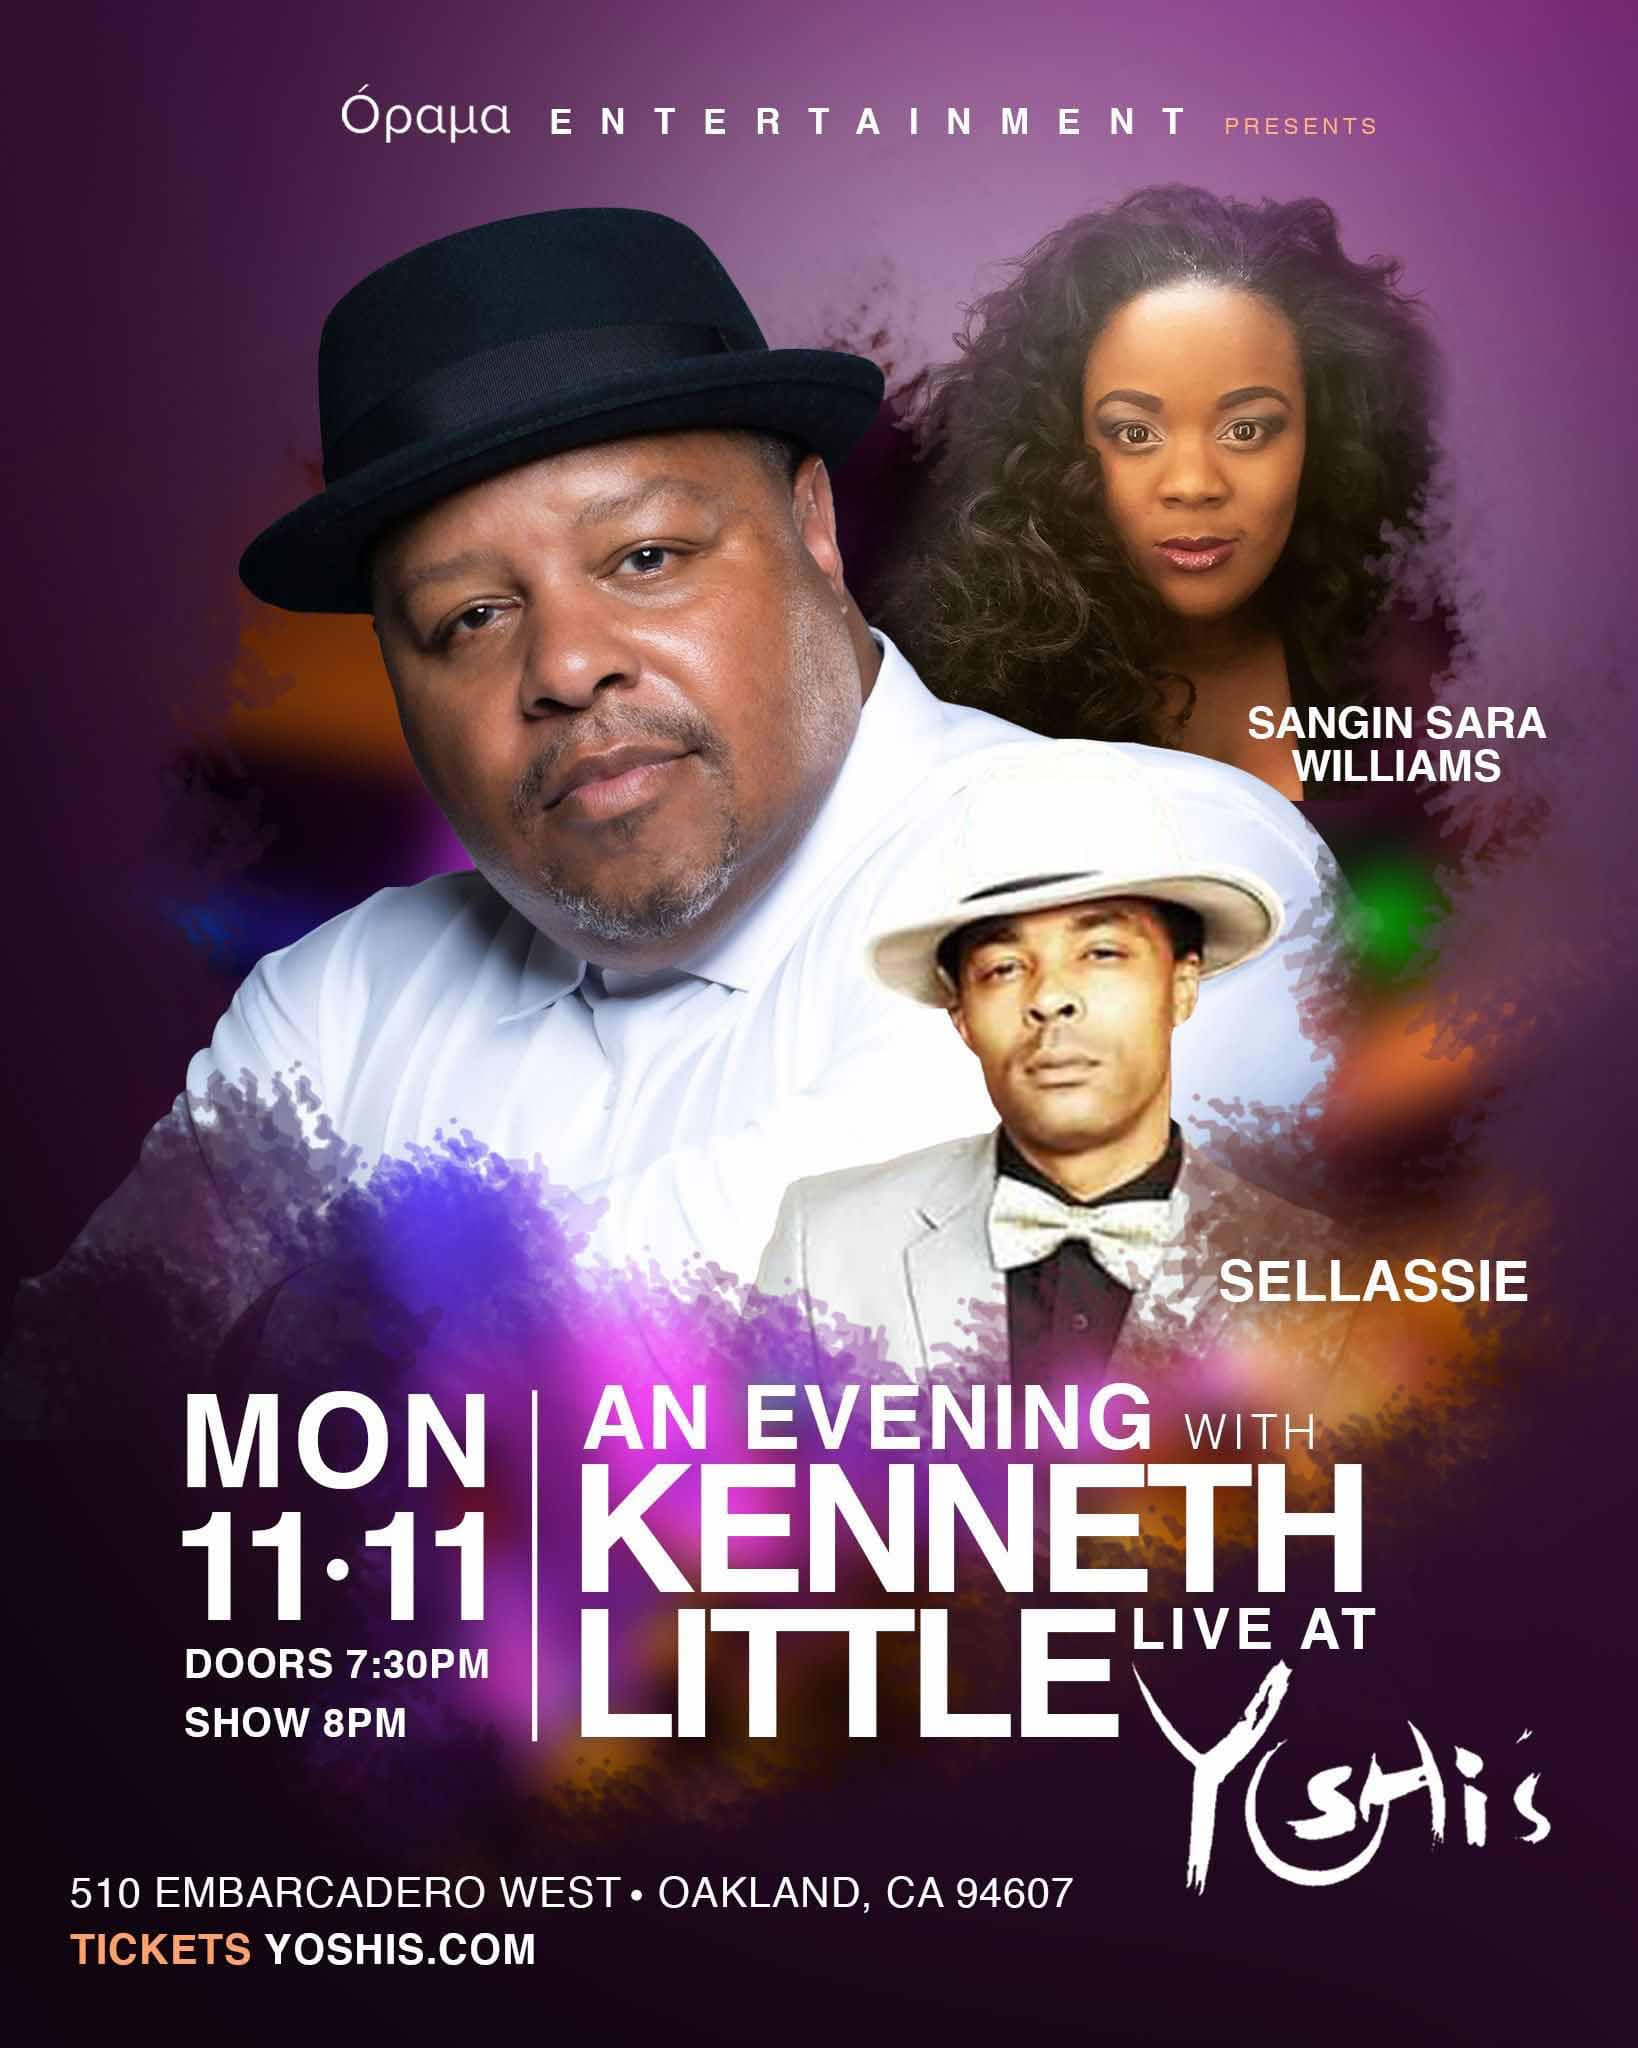 An Evening With Kenneth Little Live At Yoshis